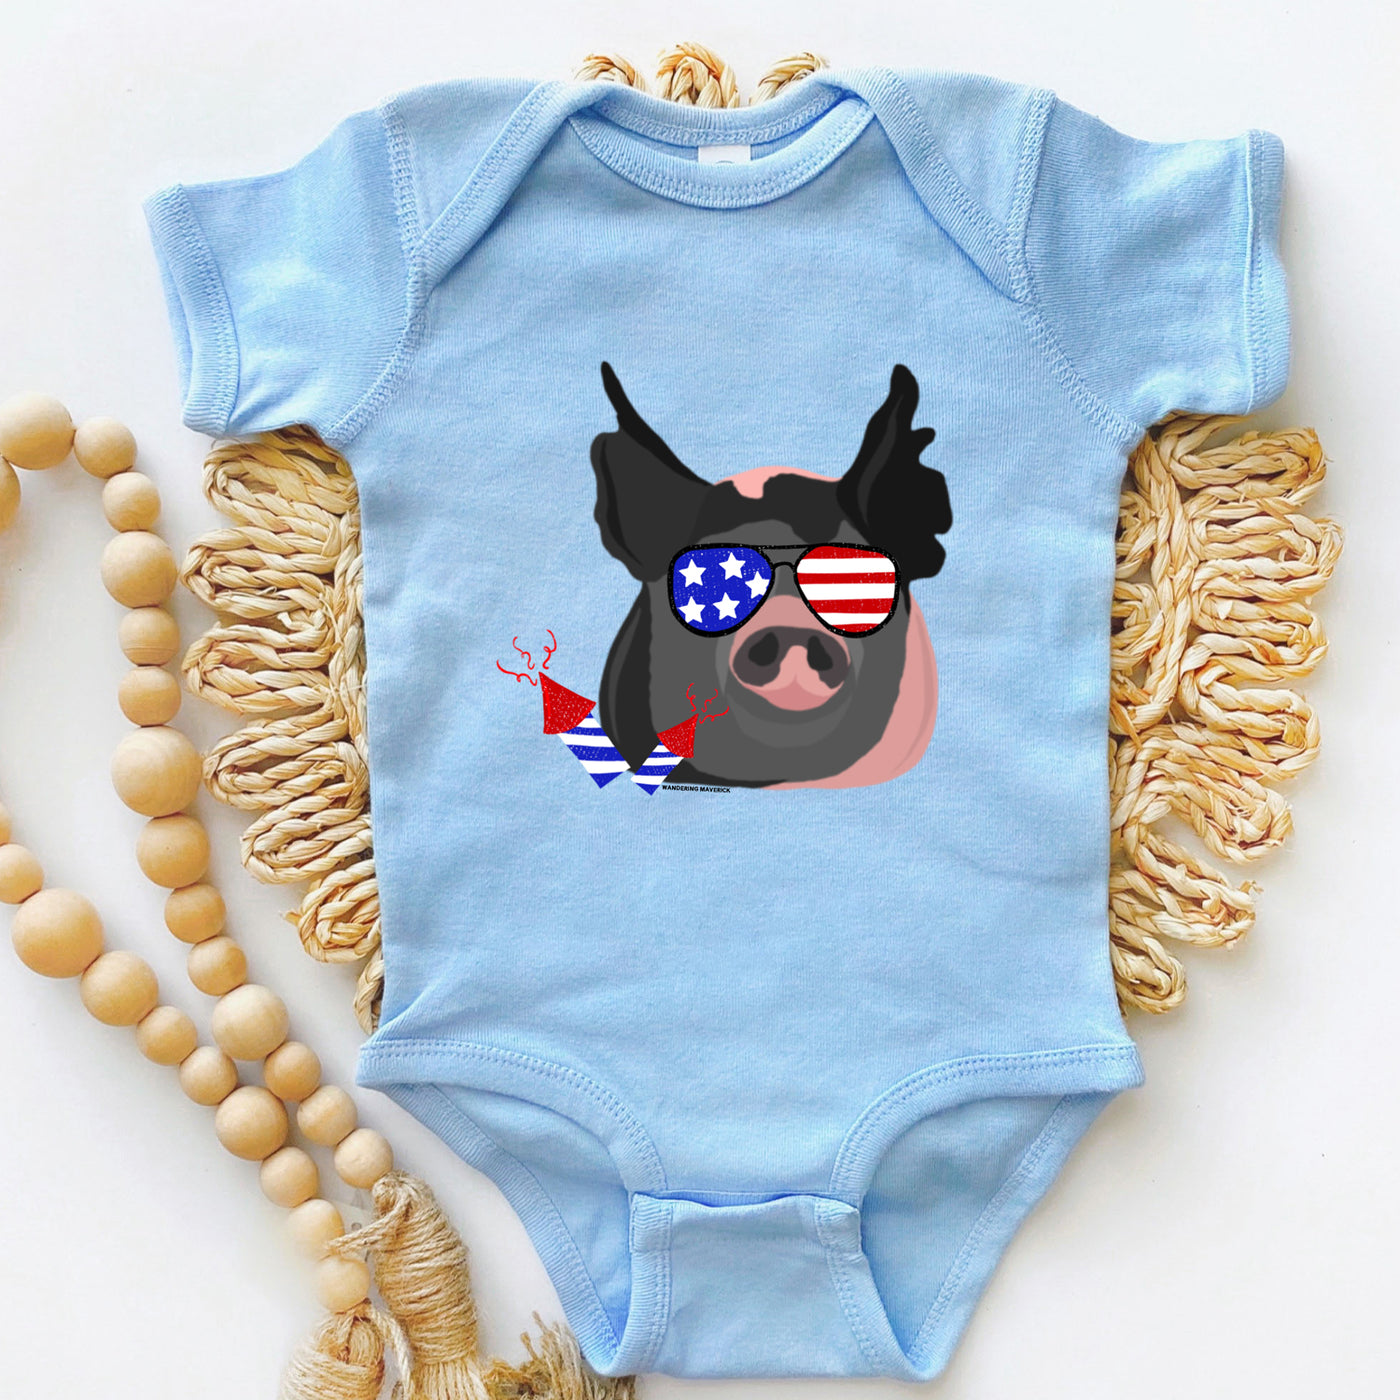 Red, White & Blue Pig One Piece/T-Shirt (Newborn - Youth XL) - Multiple Colors!